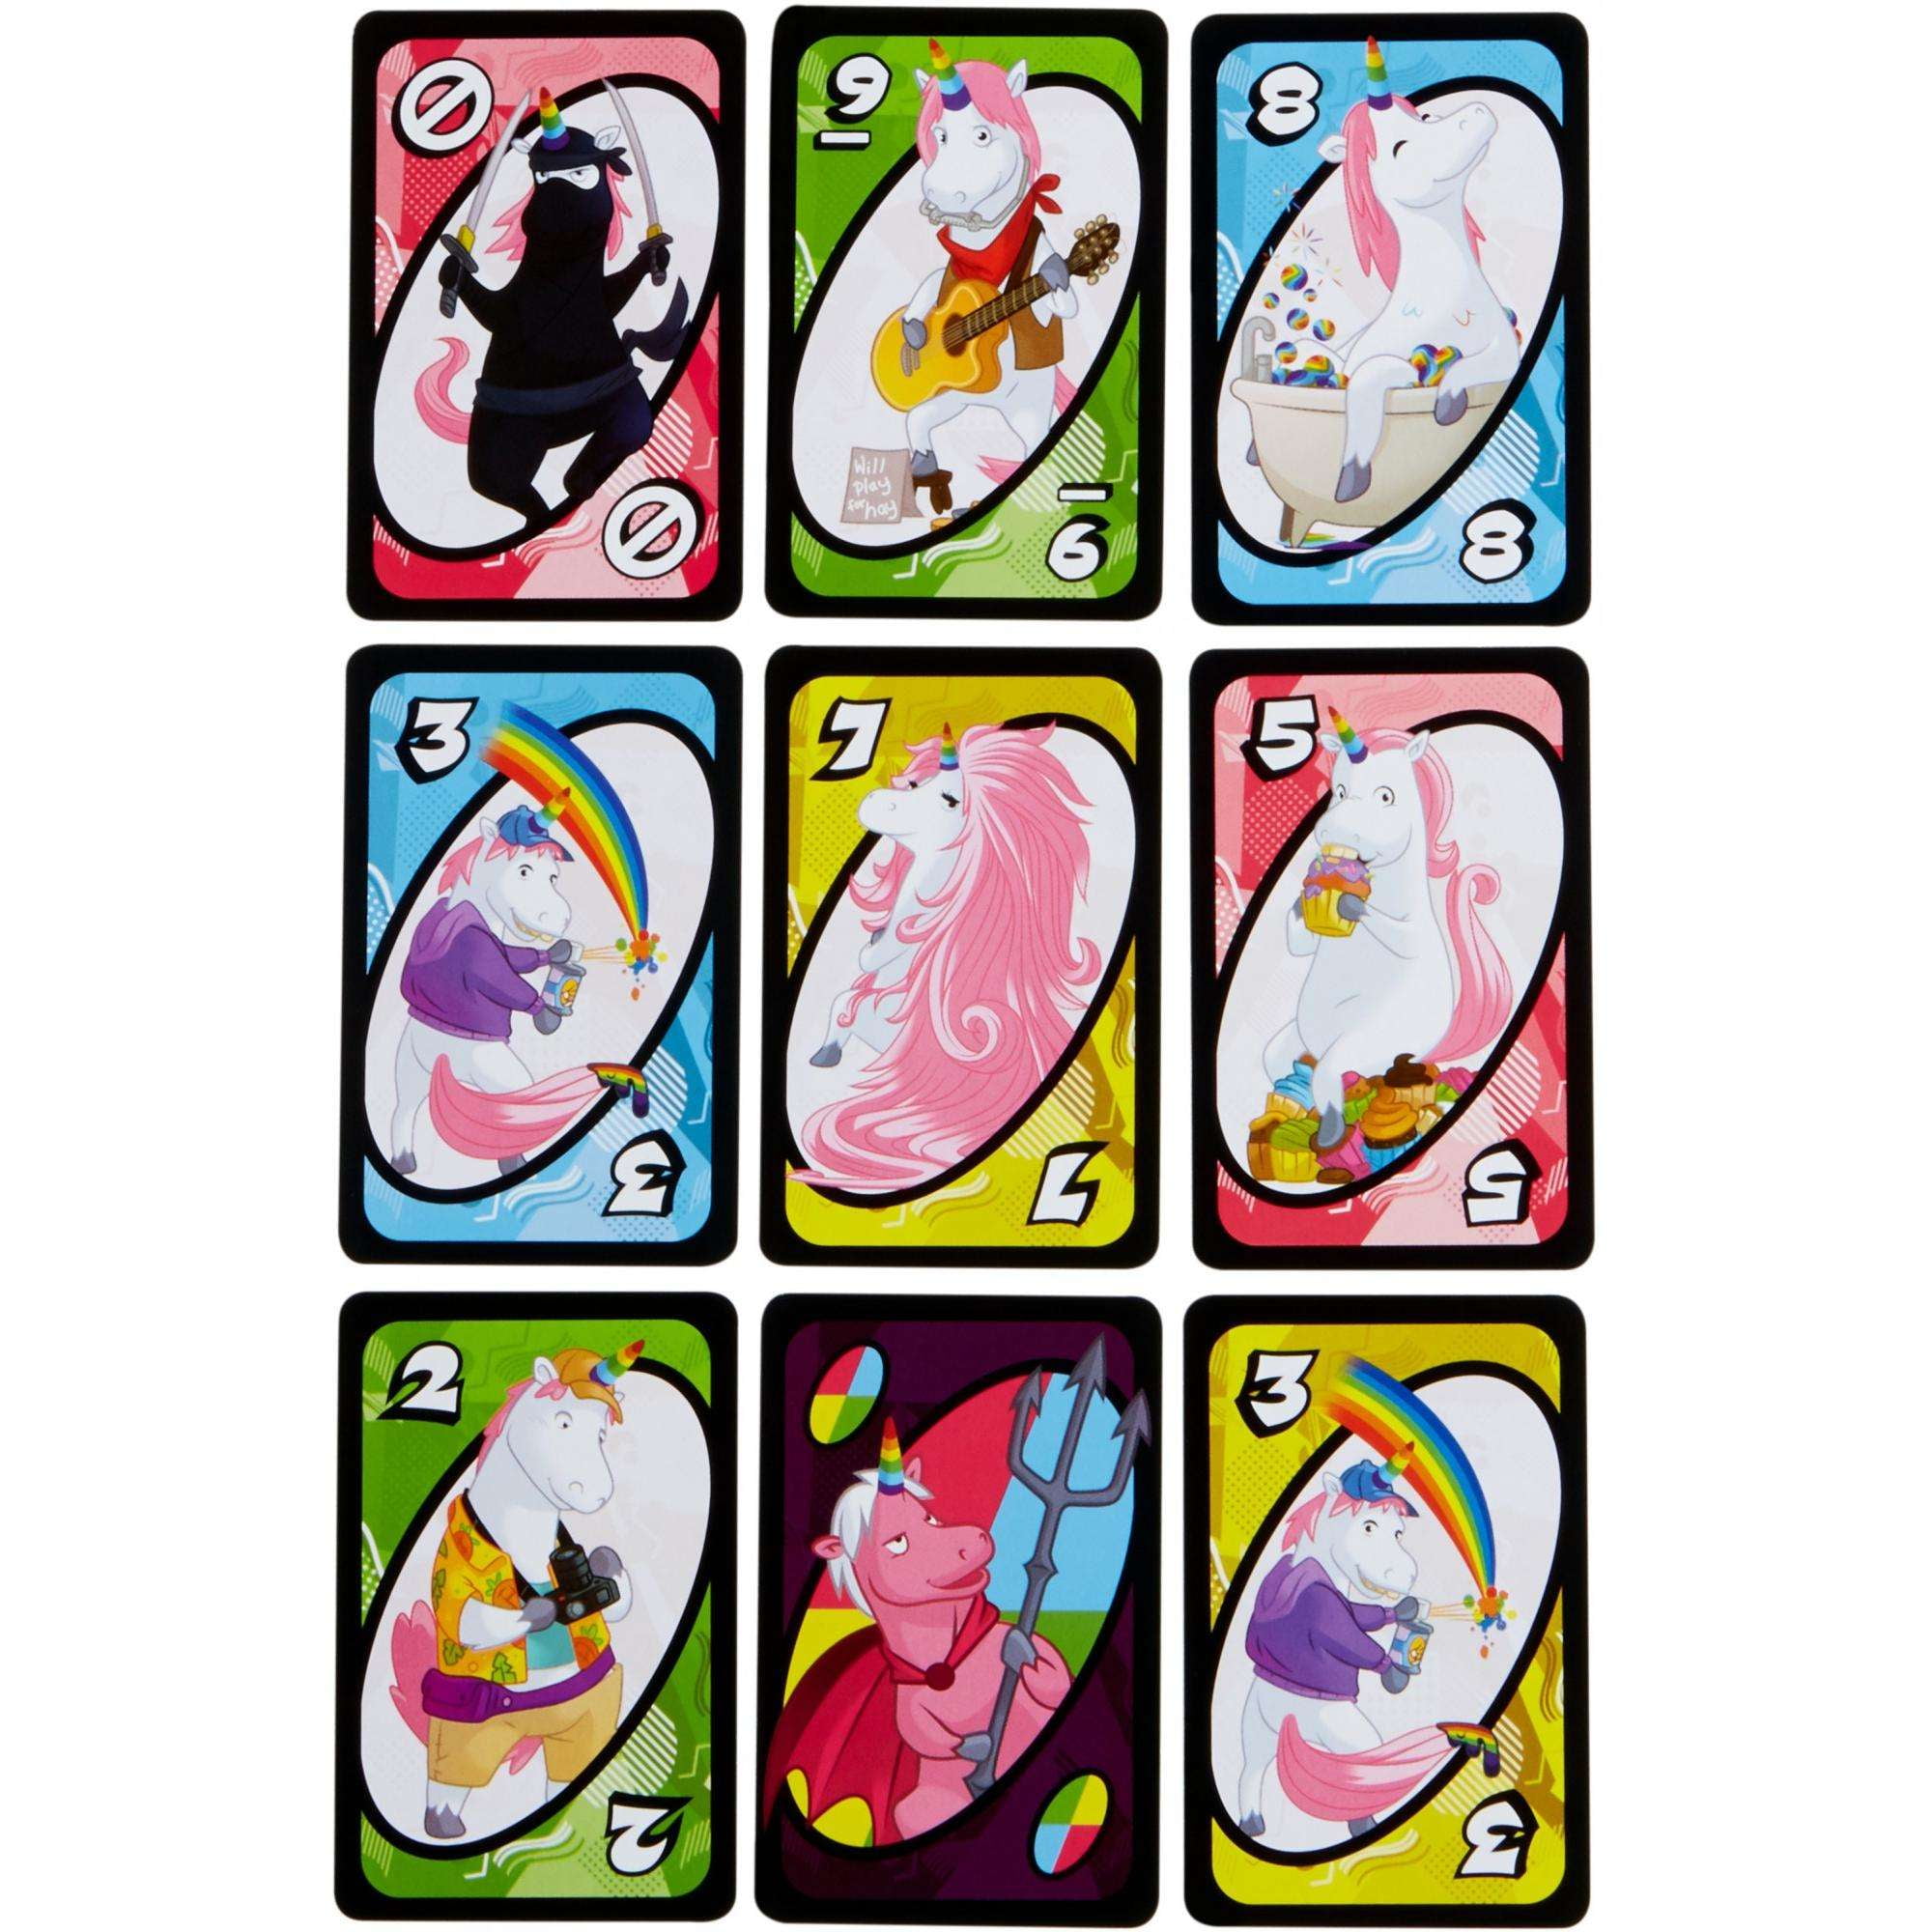 UNO UNOcorns Matching Card Game for 2-10 Players